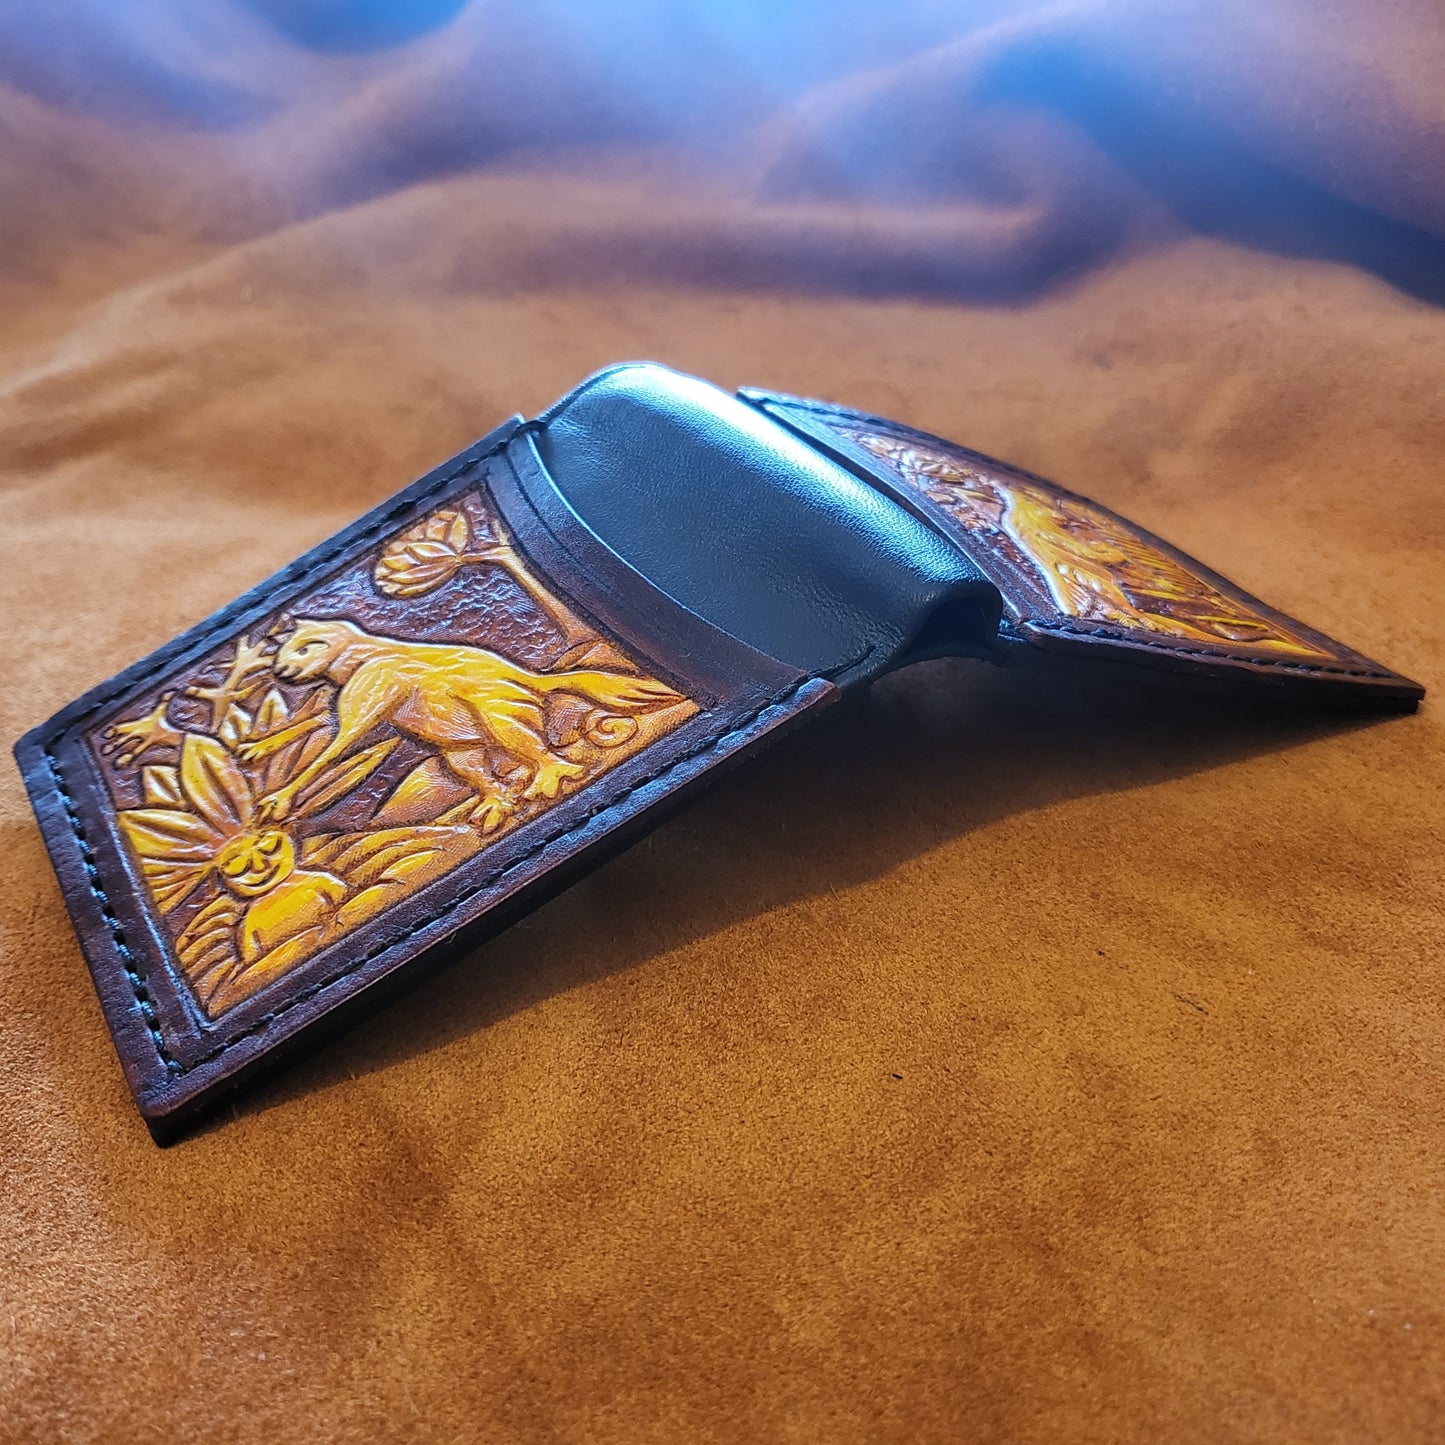 Marginalia medieval cats - bee keepers - leather wallet- Dark Brown and ivory colour - Leather Bifold Wallet - Handcrafted